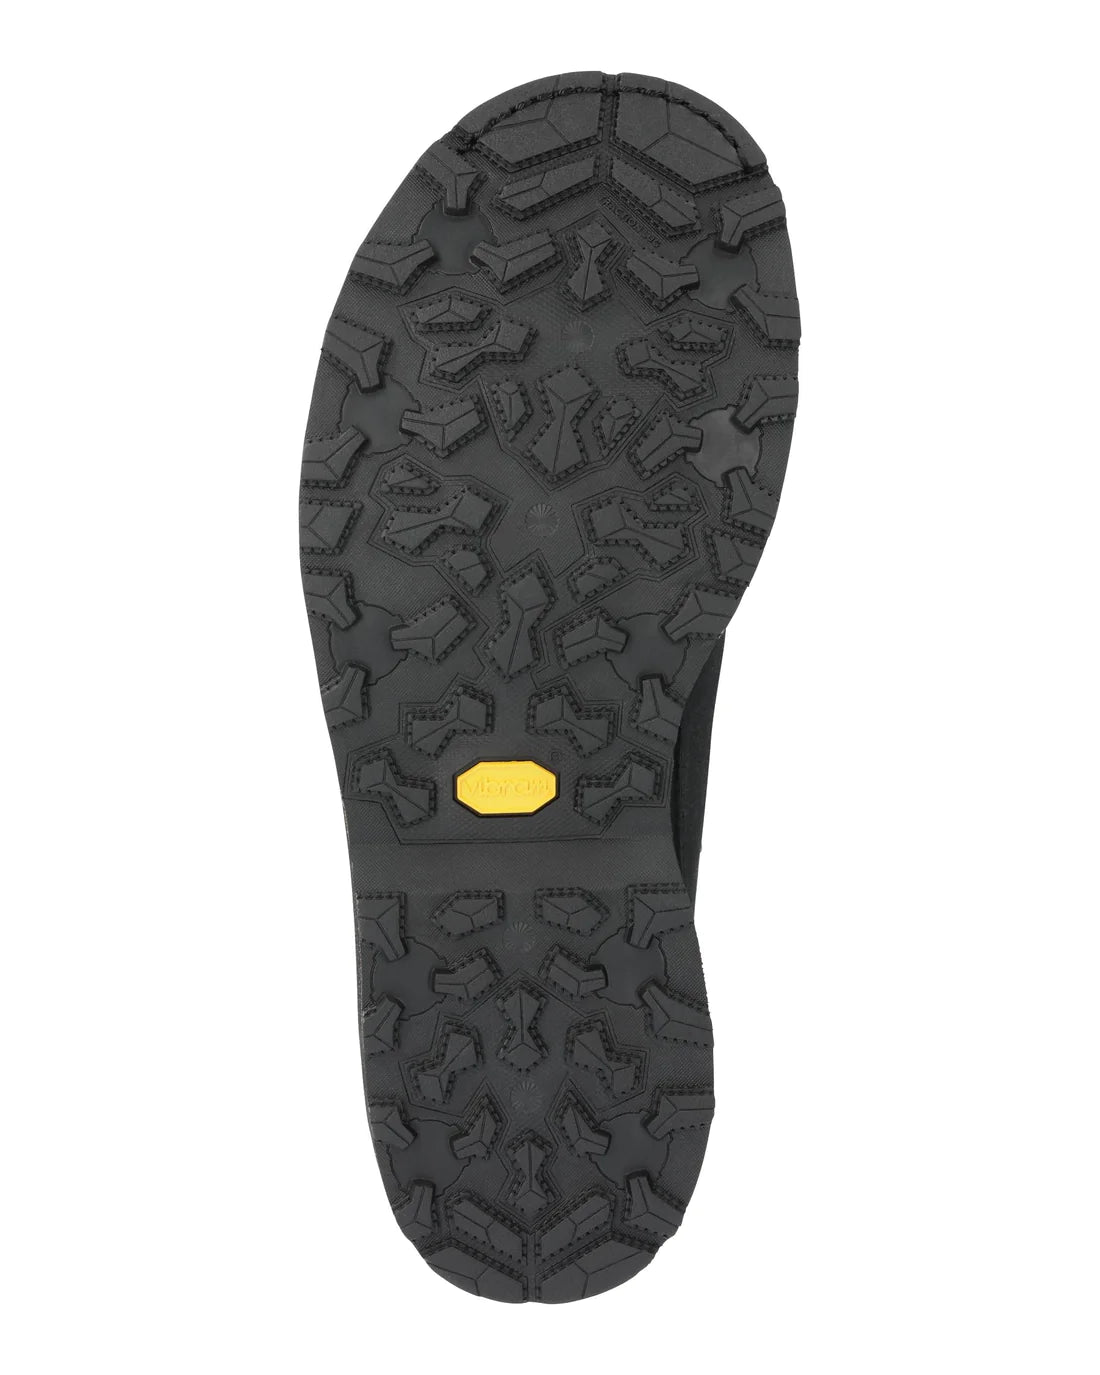 M's G3 Guide Wading Boots - Vibram Sole